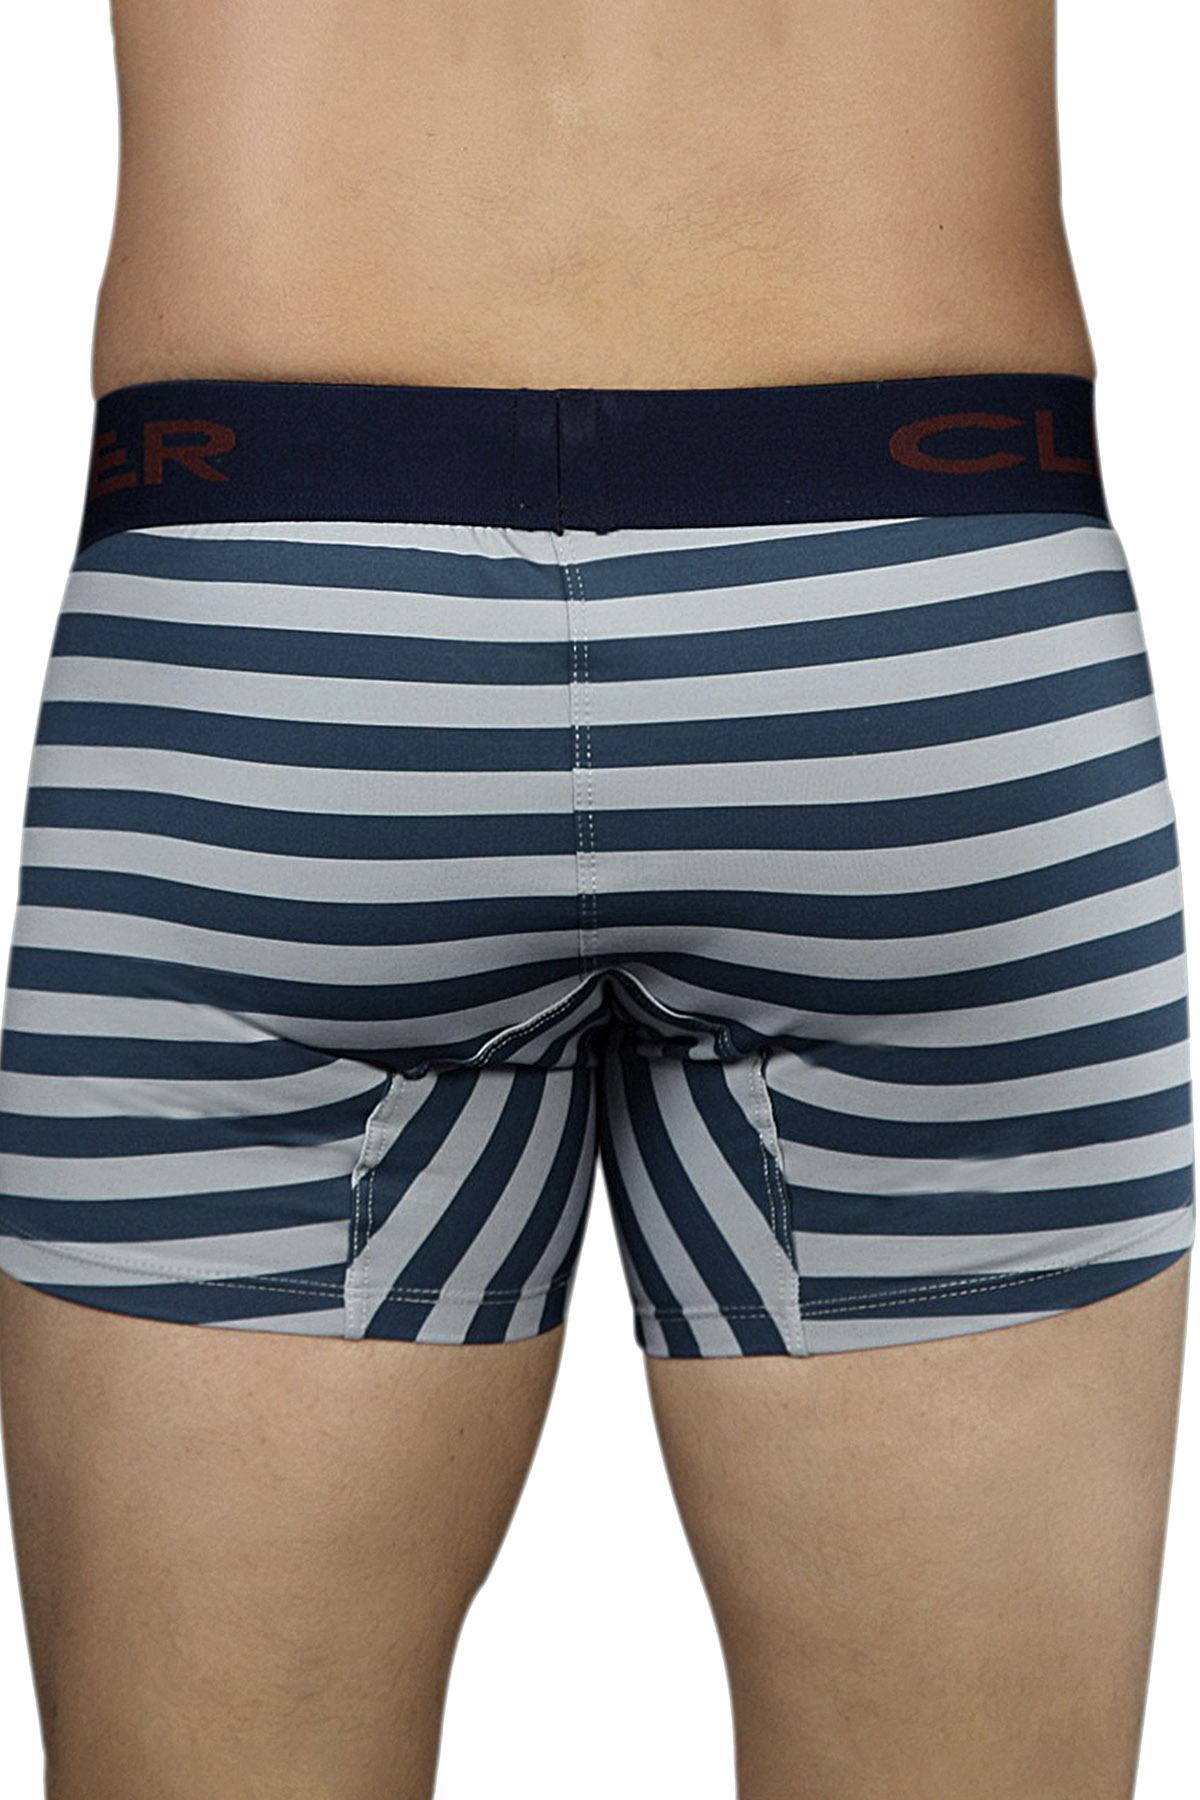 Clever Teal Limited Edition Trunk – CheapUndies